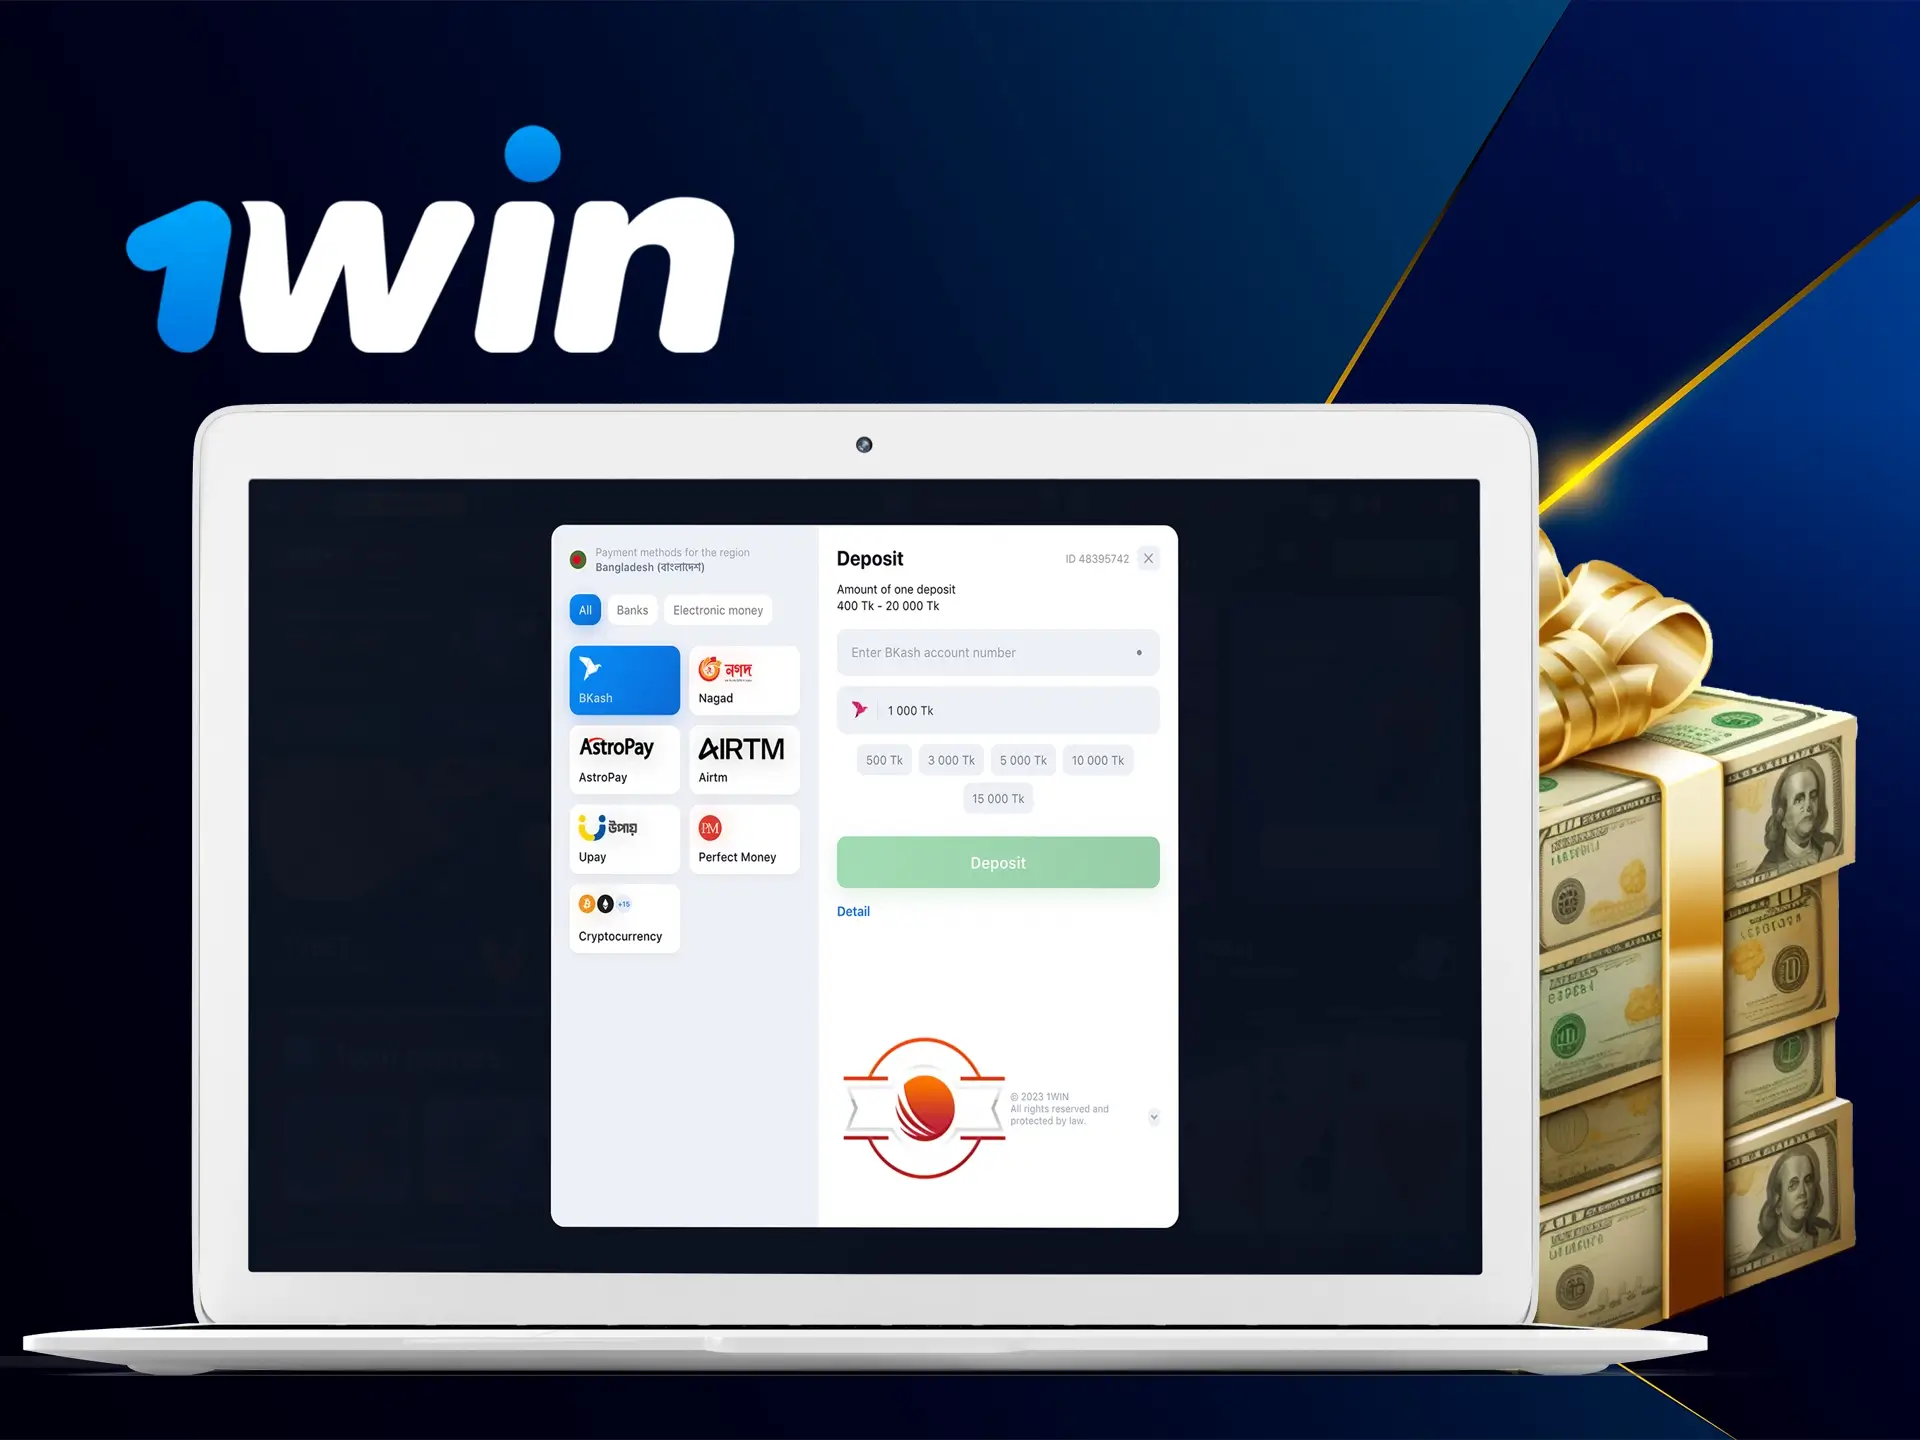 The biggest bonus from 1Win becomes available after a simple registration and first deposit at the casino.